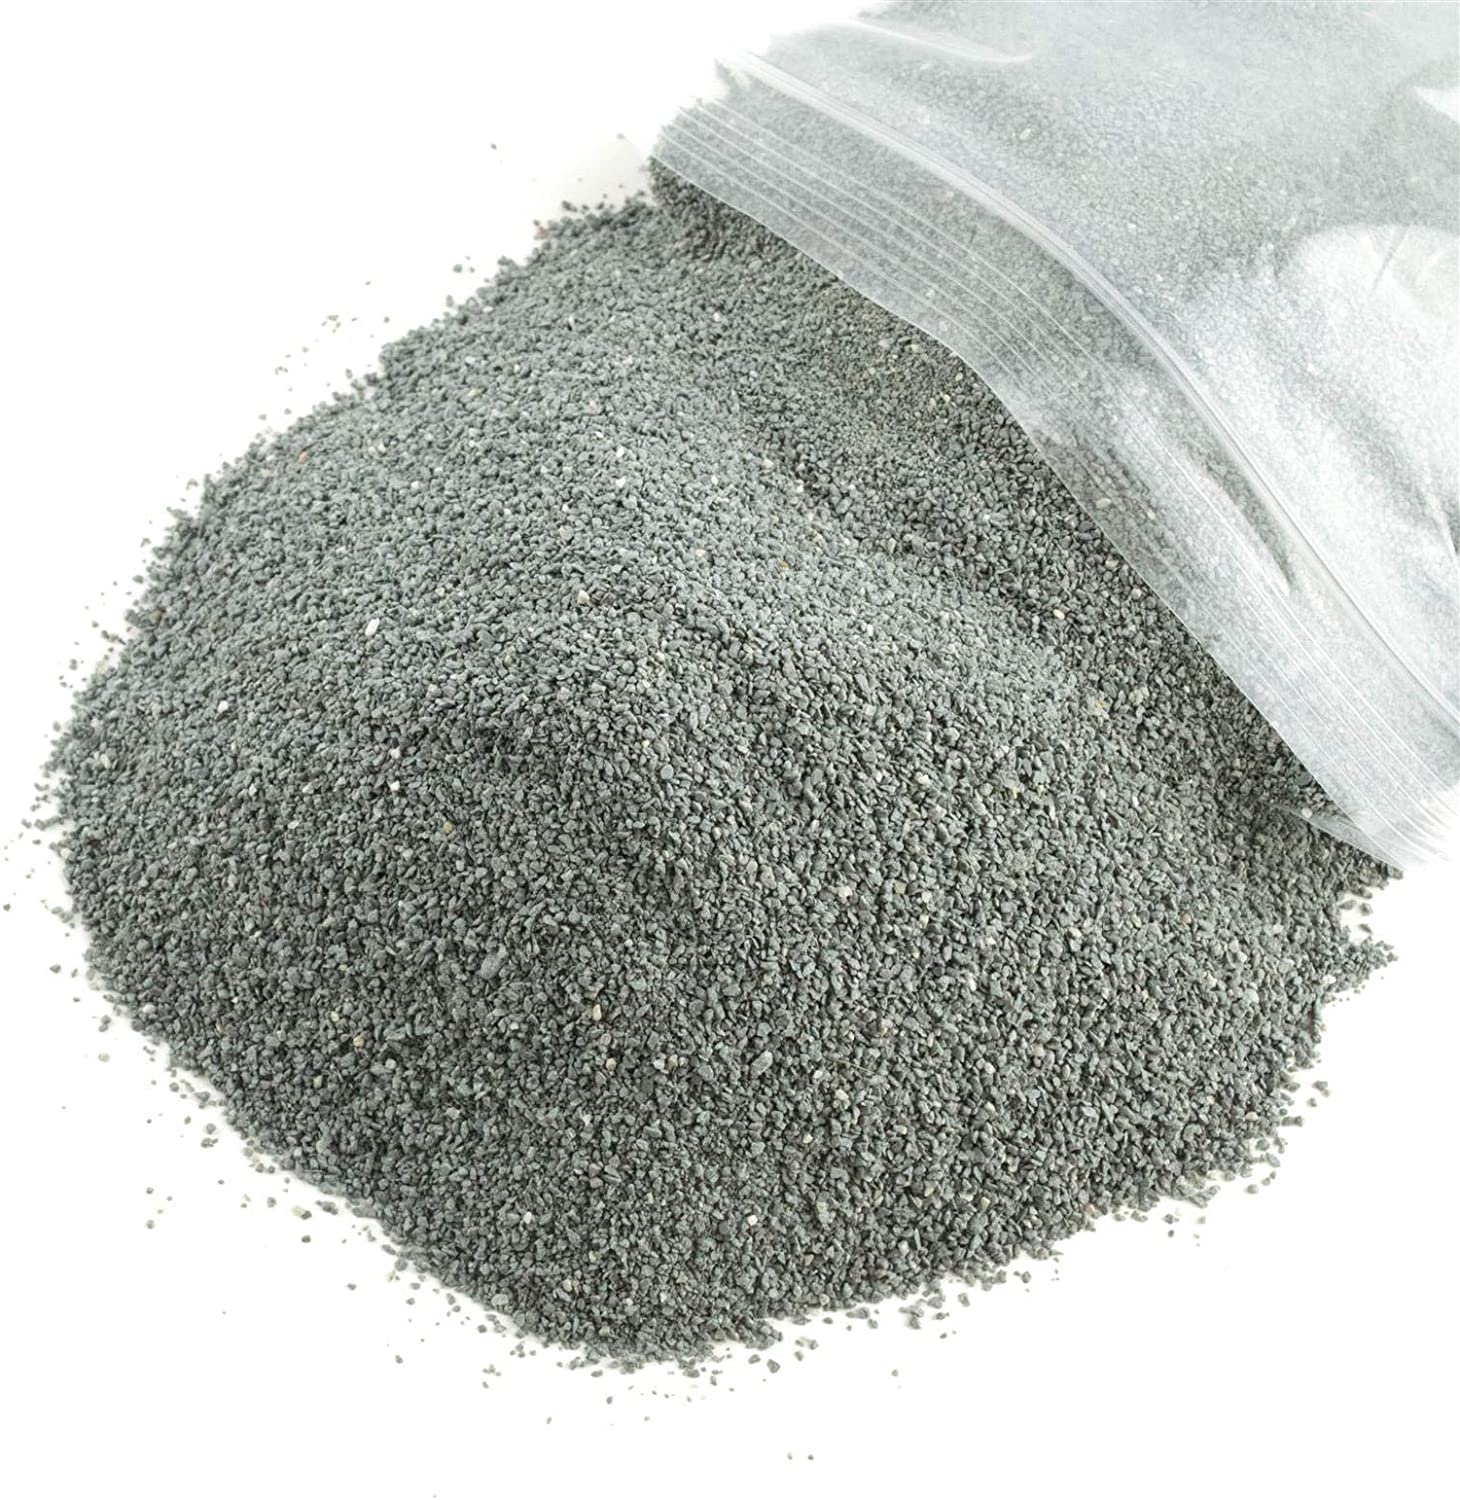 Stone Dust Suppliers